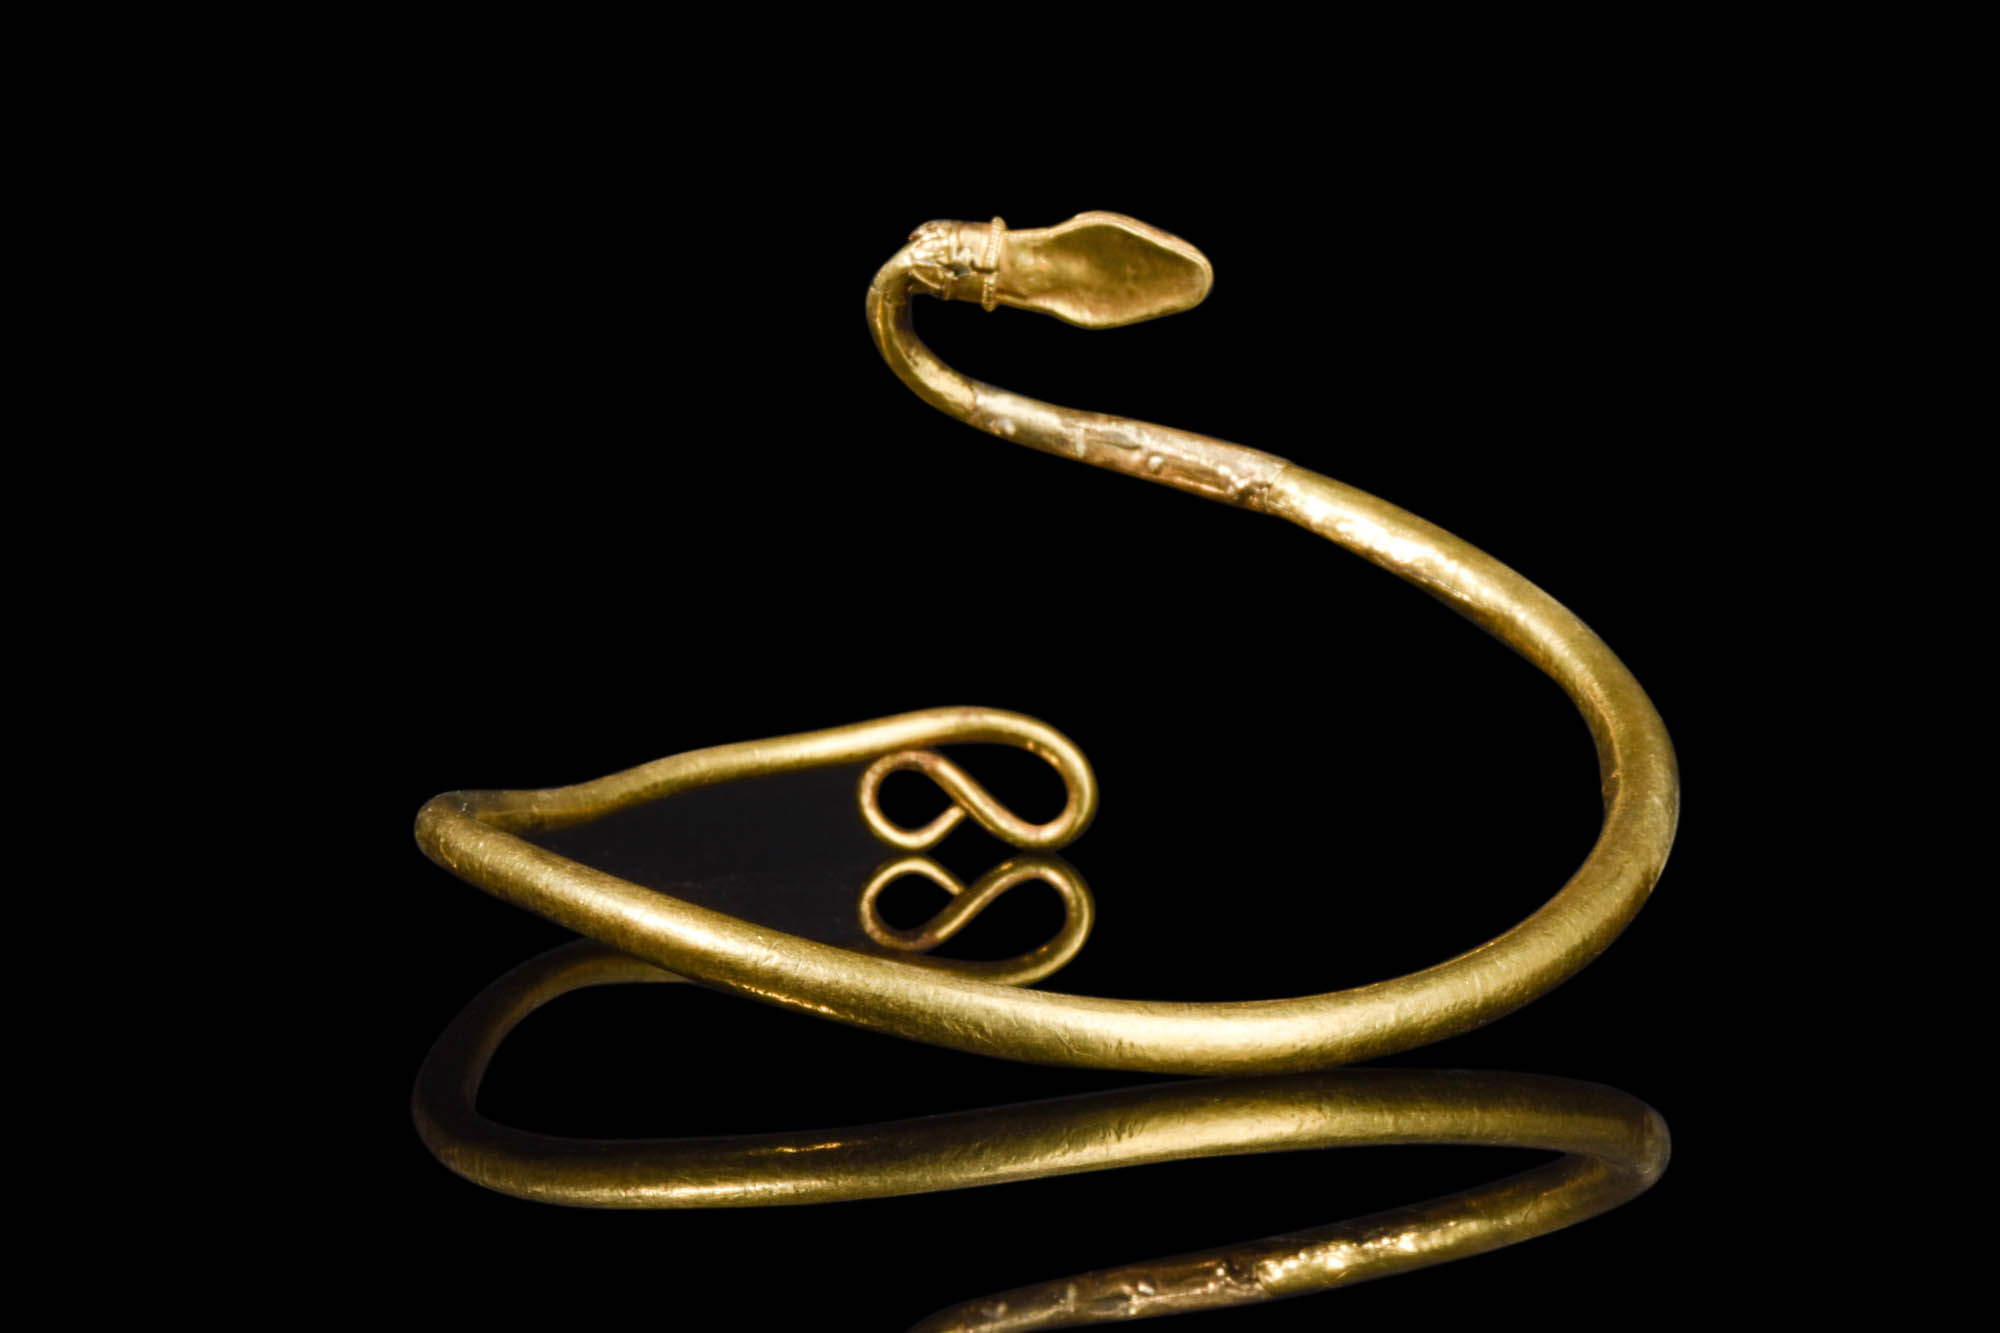 HEAVY PTOLEMAIC GOLD ARM RING - Image 2 of 5